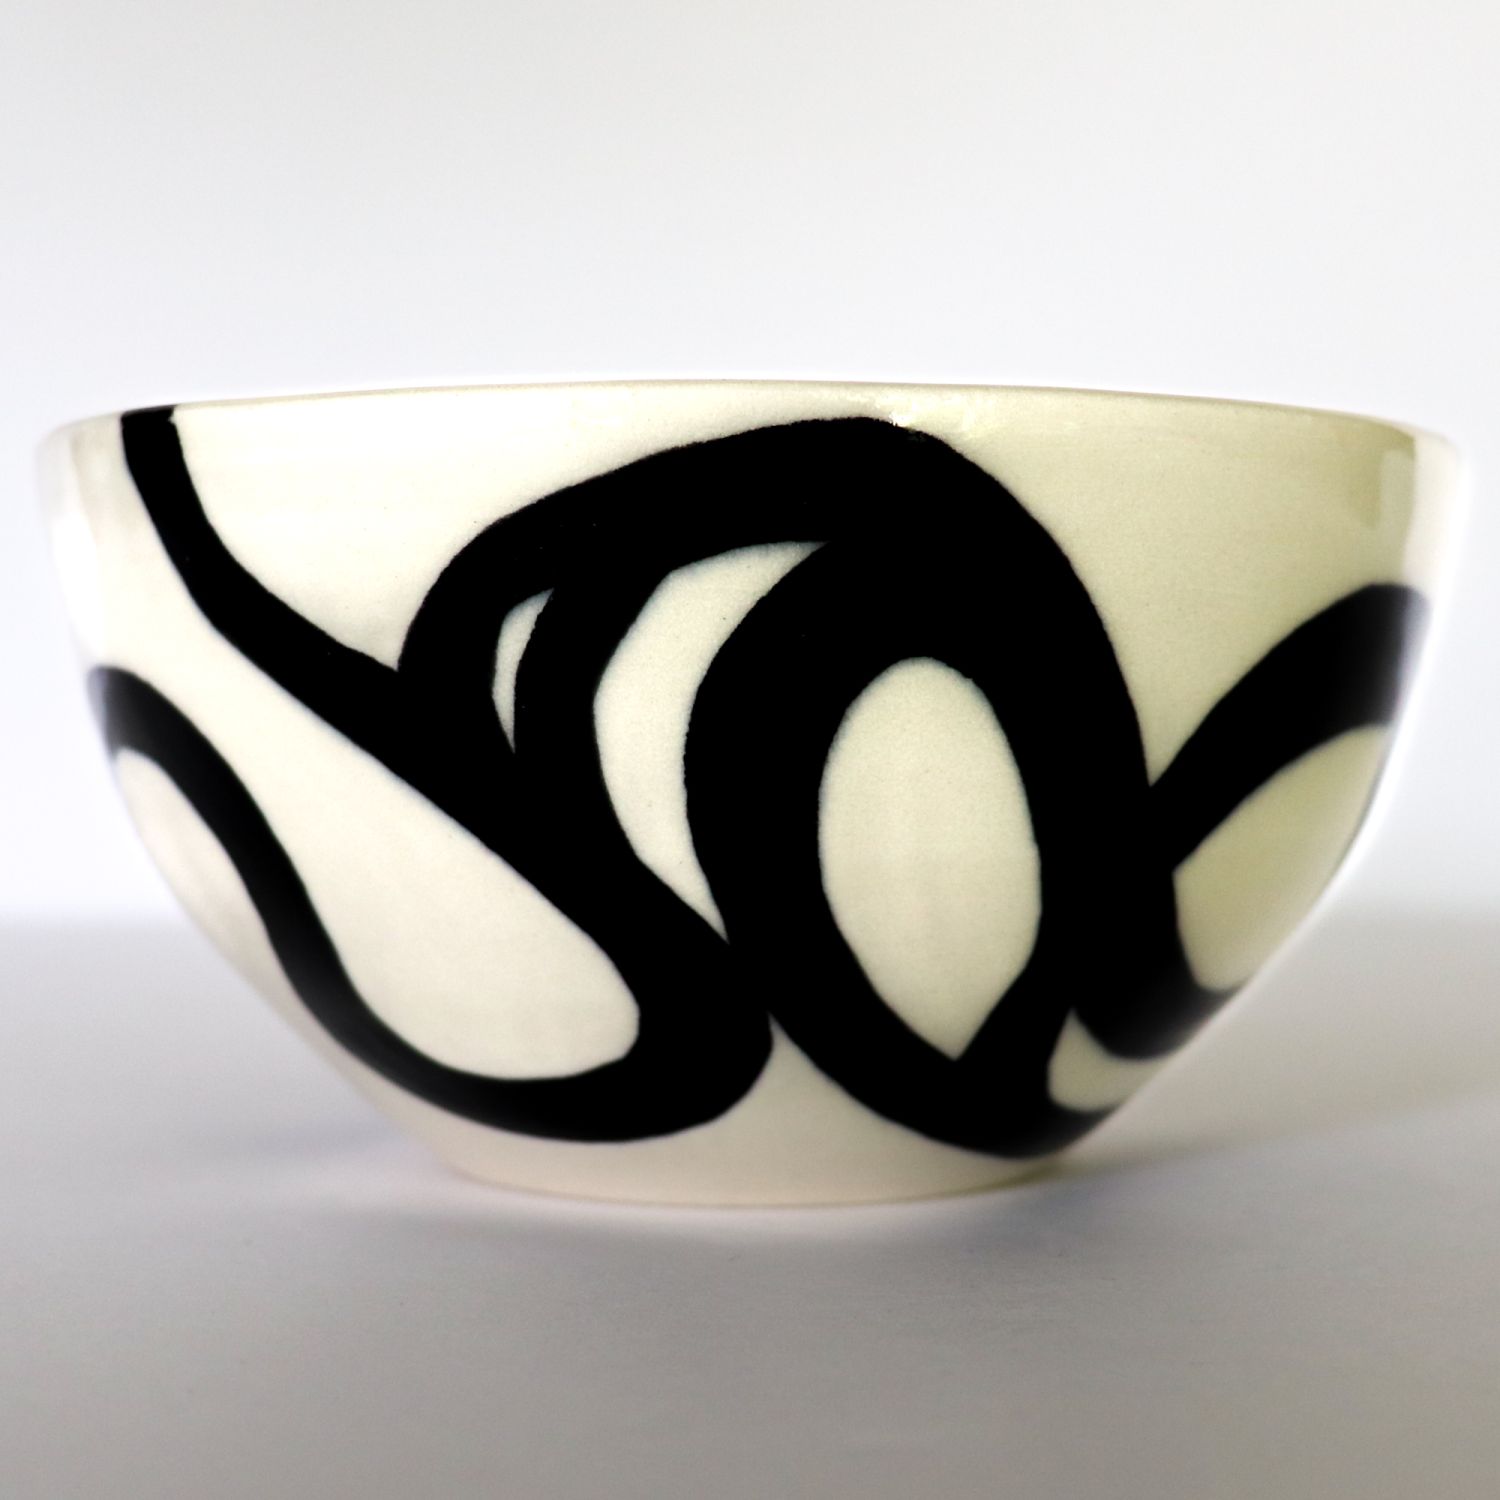 Alana Marcoccia: Interconnected Bowl – Small Product Image 5 of 5